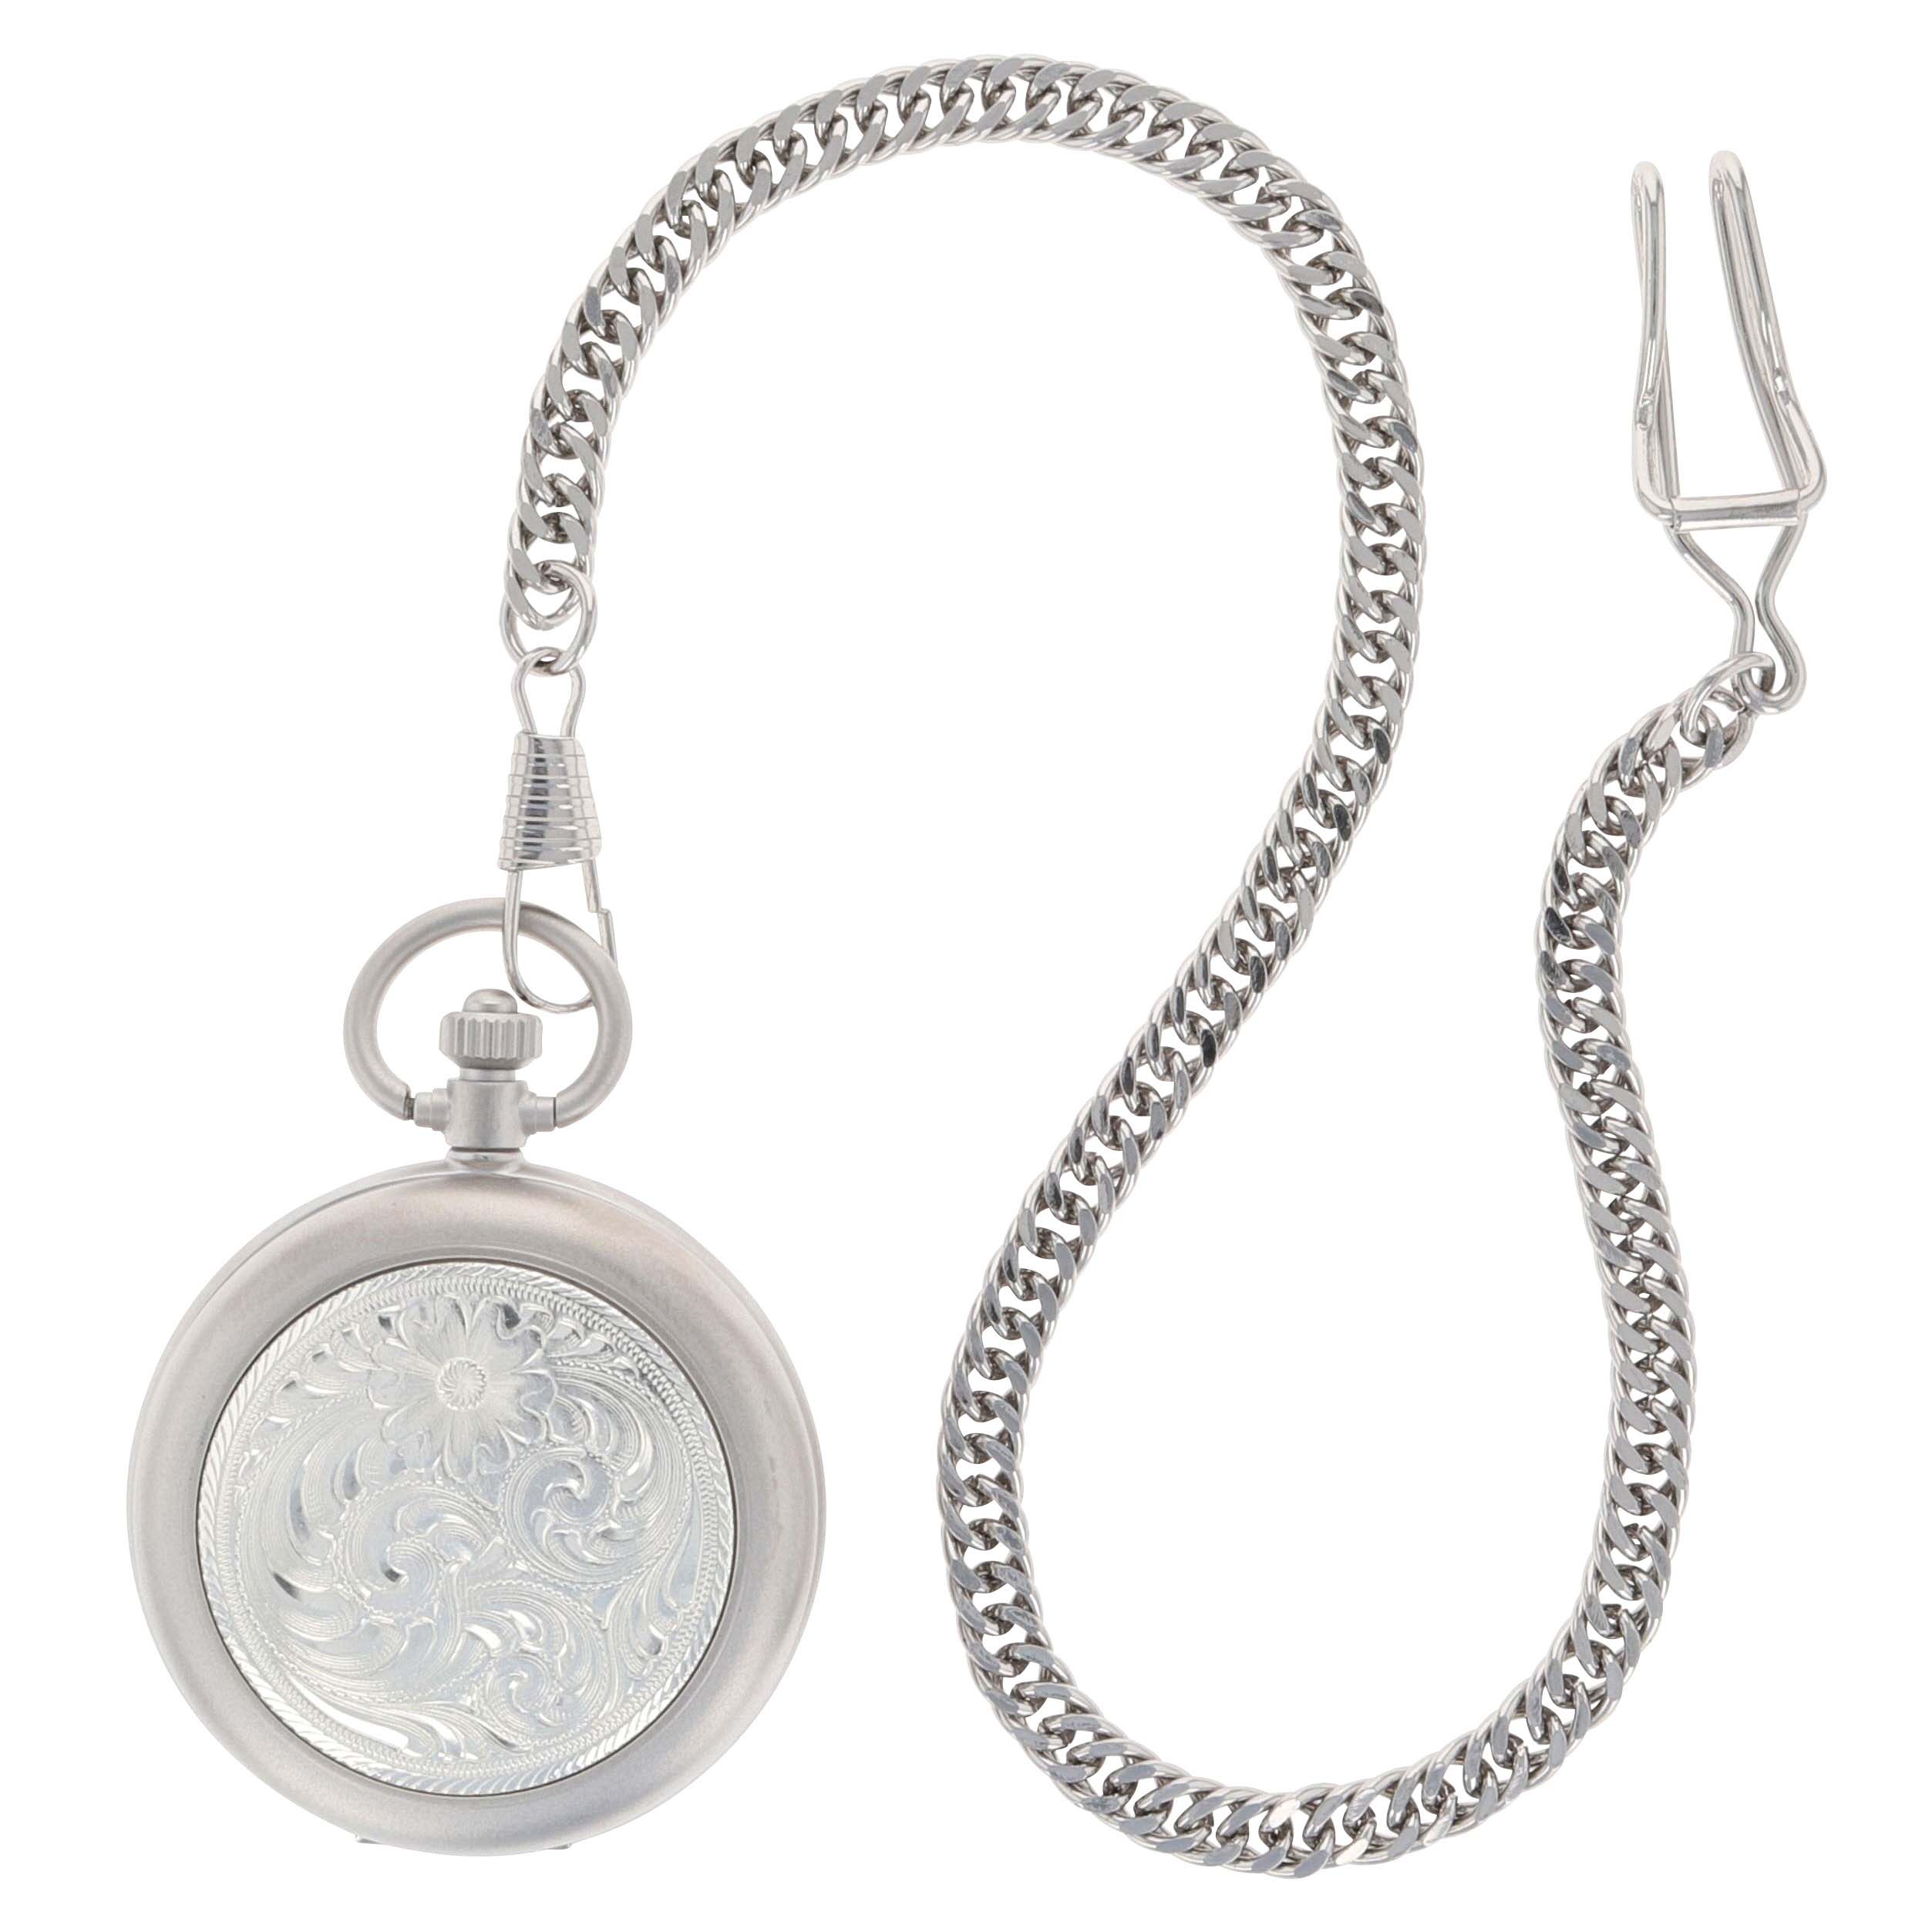 Engraved Silver, Small Silver Inlay, Pocket Watch